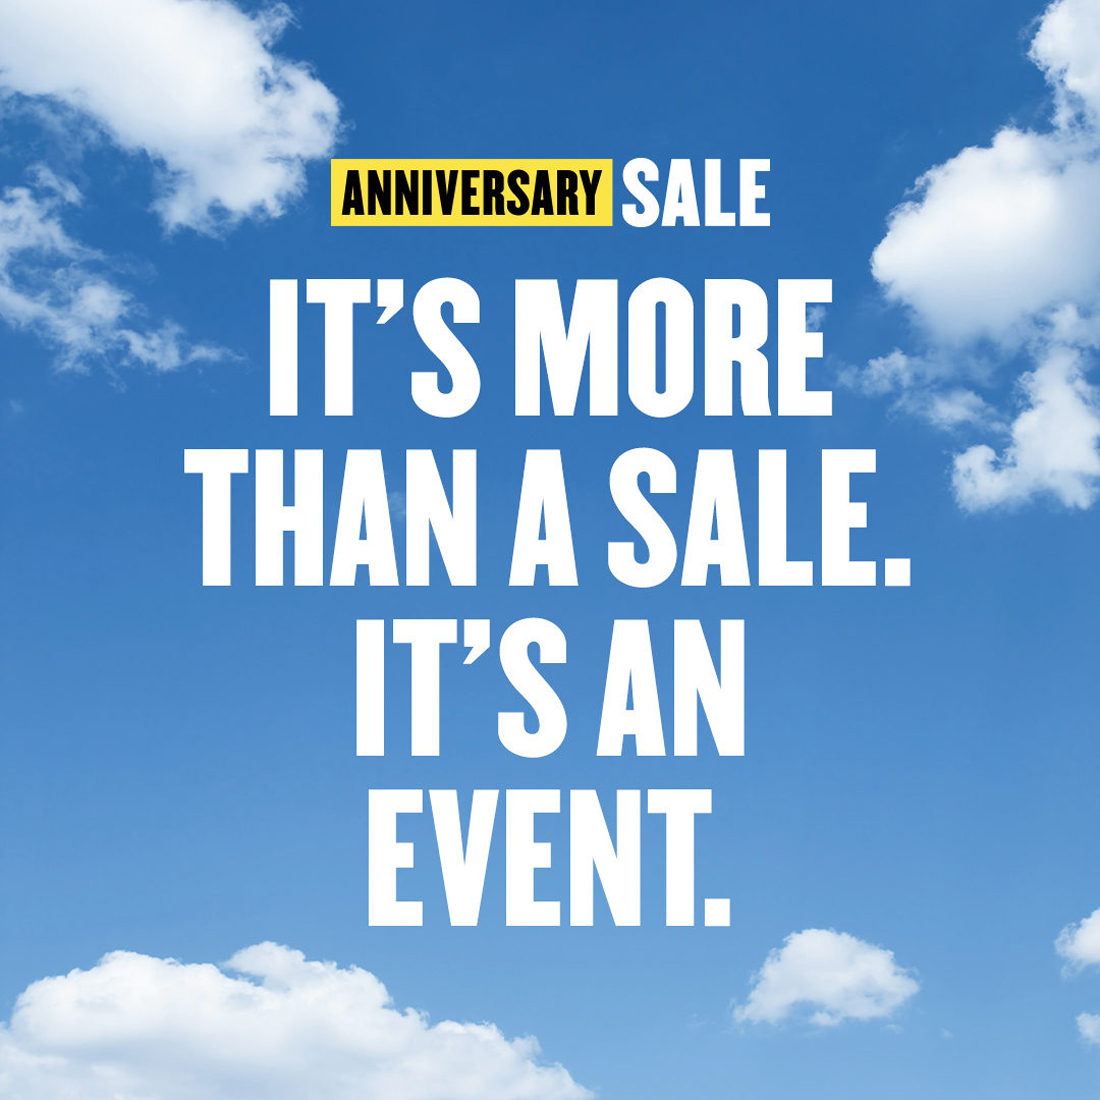 Nordstrom Anniversary Sale Catalog, NSale Catalog Preview